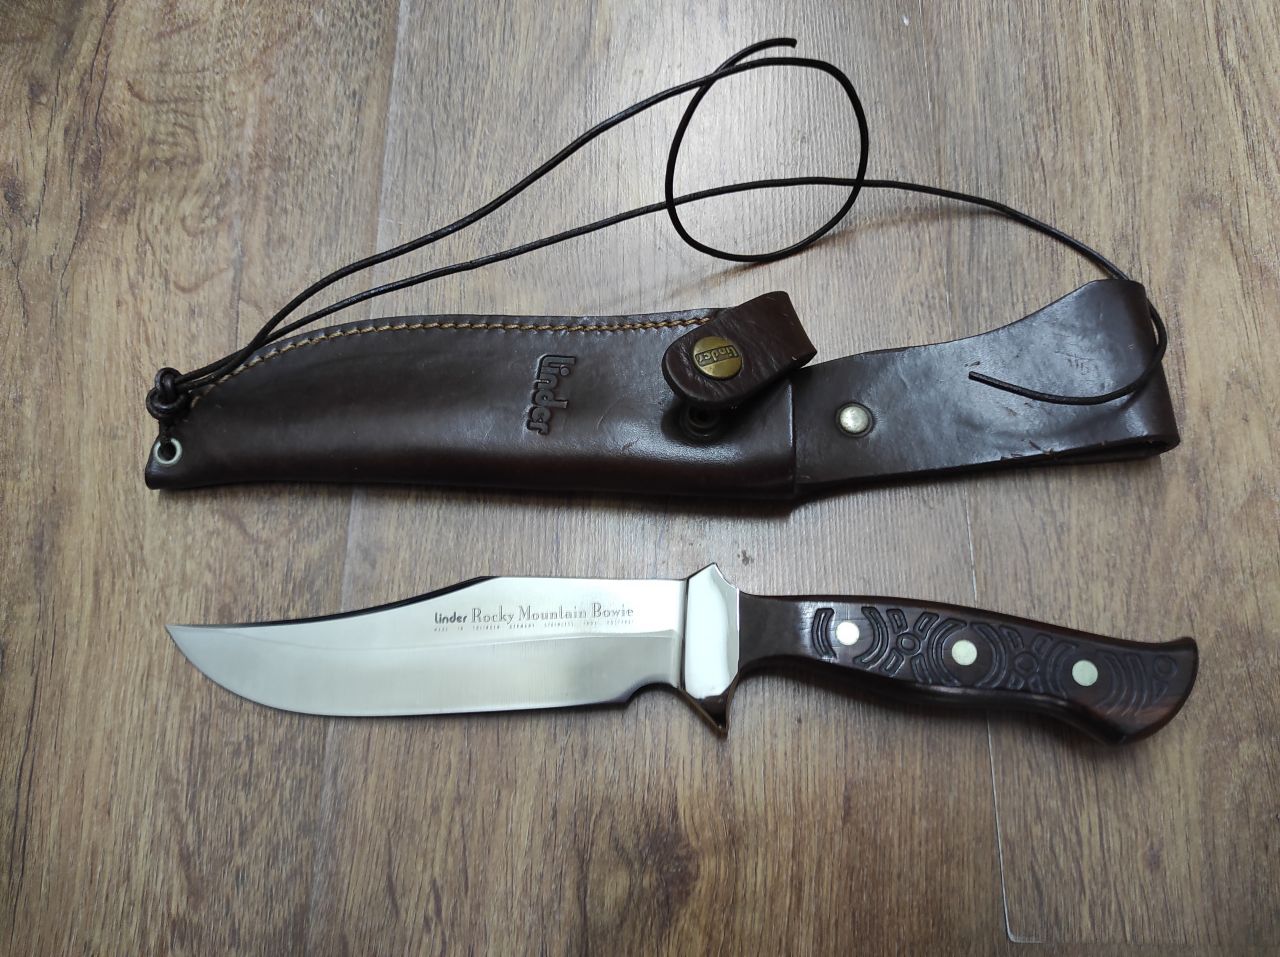 Linder Rocky Mountain Bowie